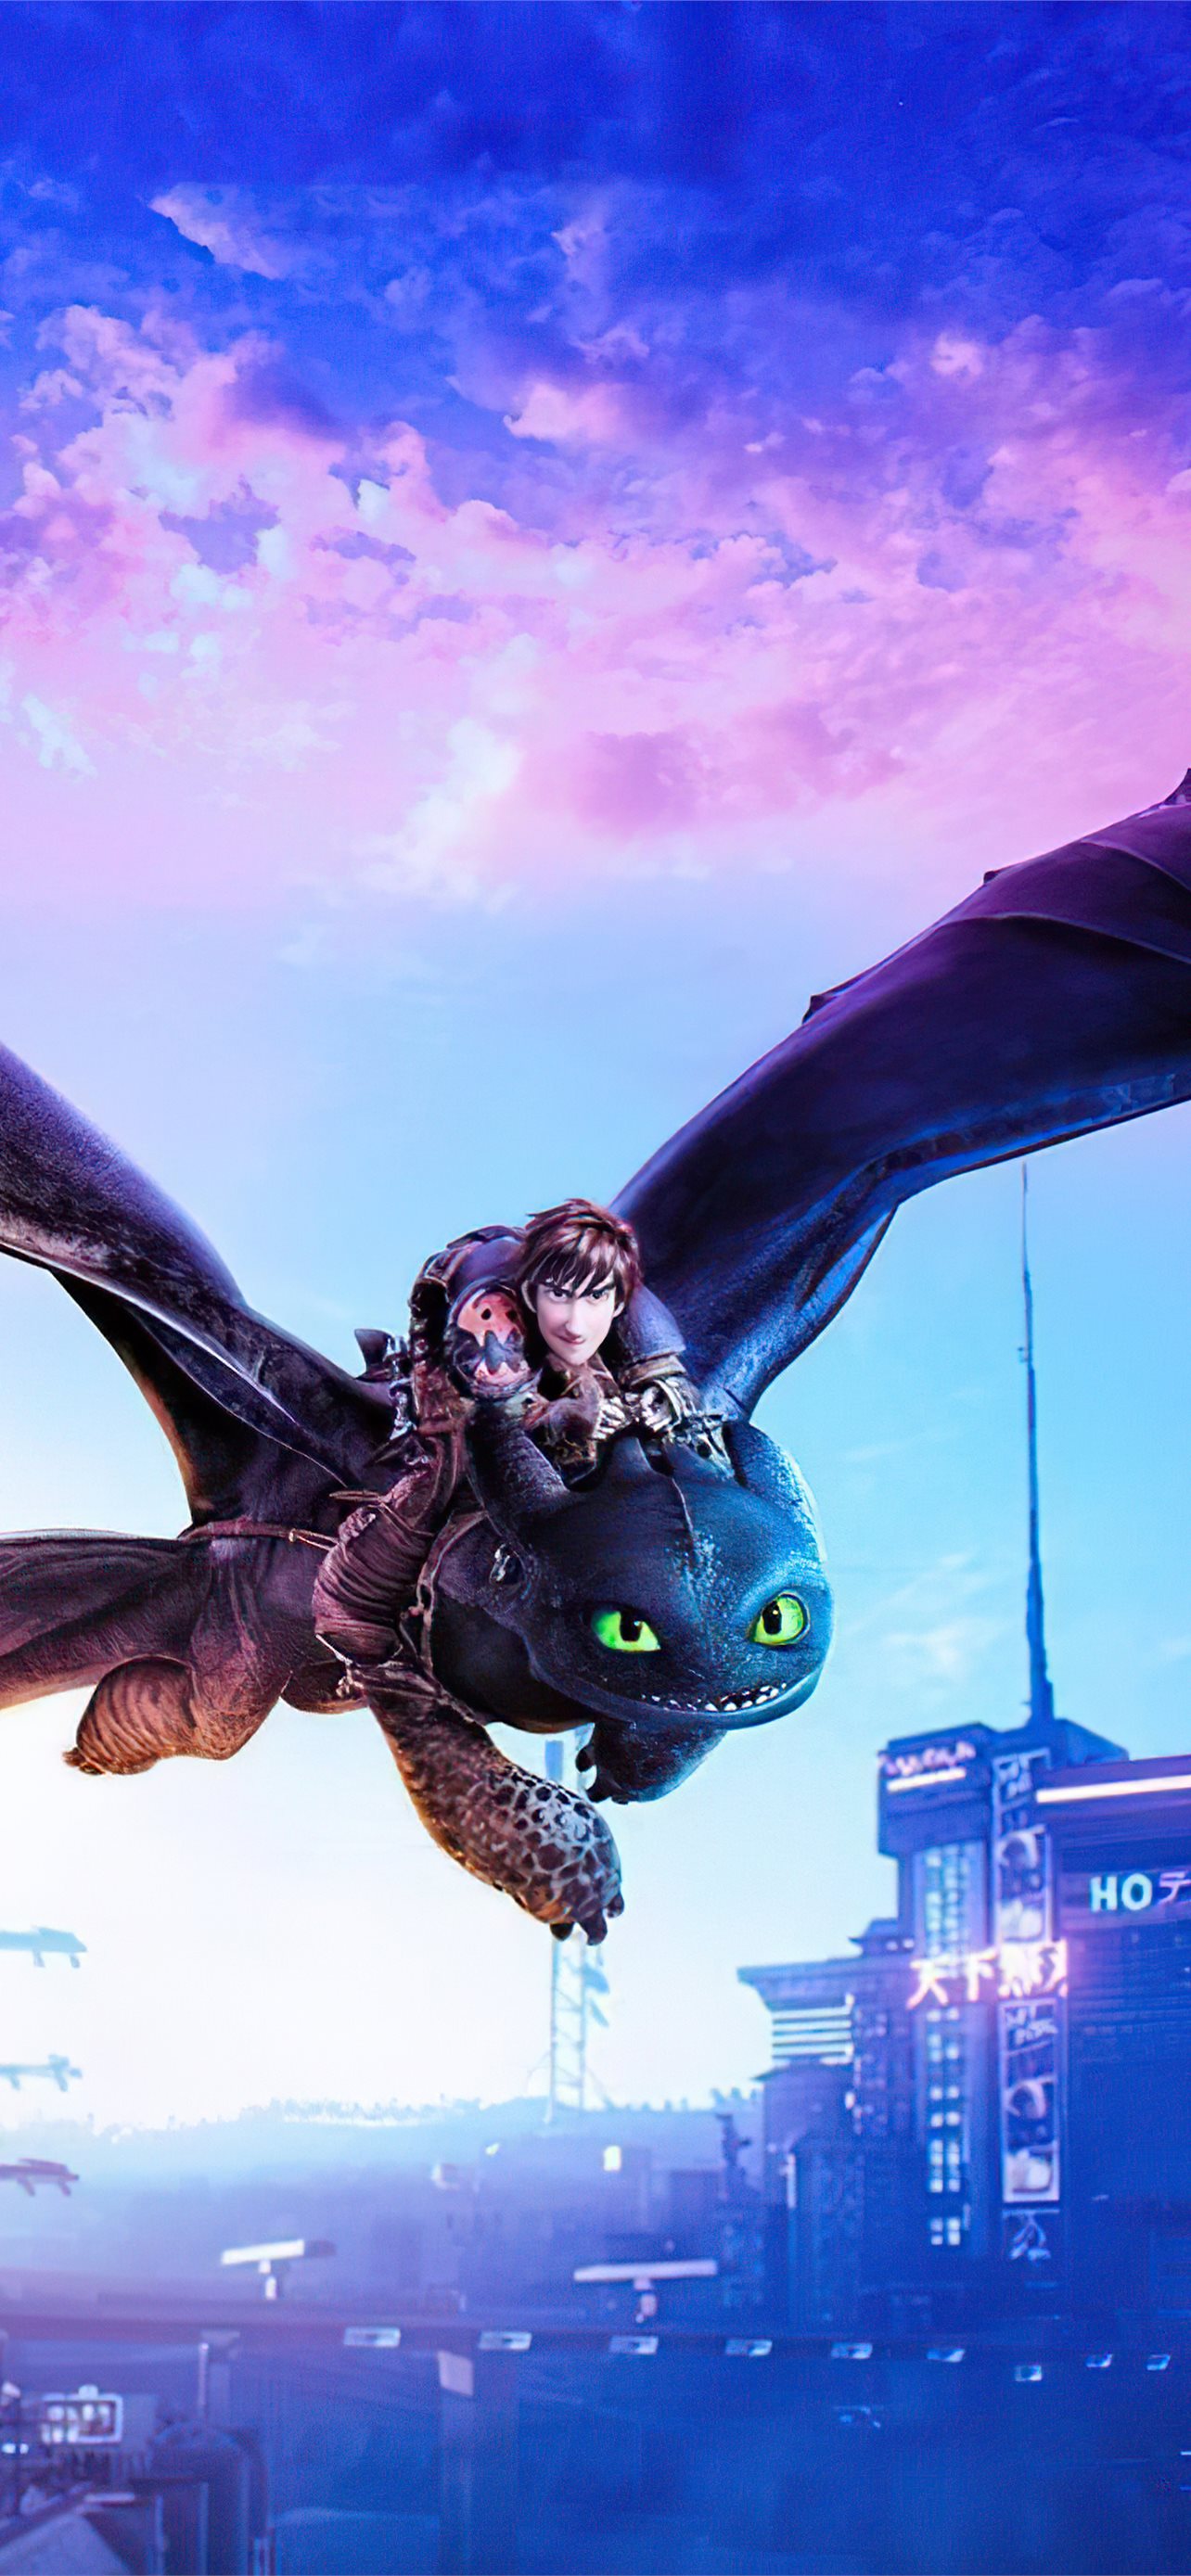 Toothless Night Fury Dragon 5K Wallpapers  HD Wallpapers  ID 26178